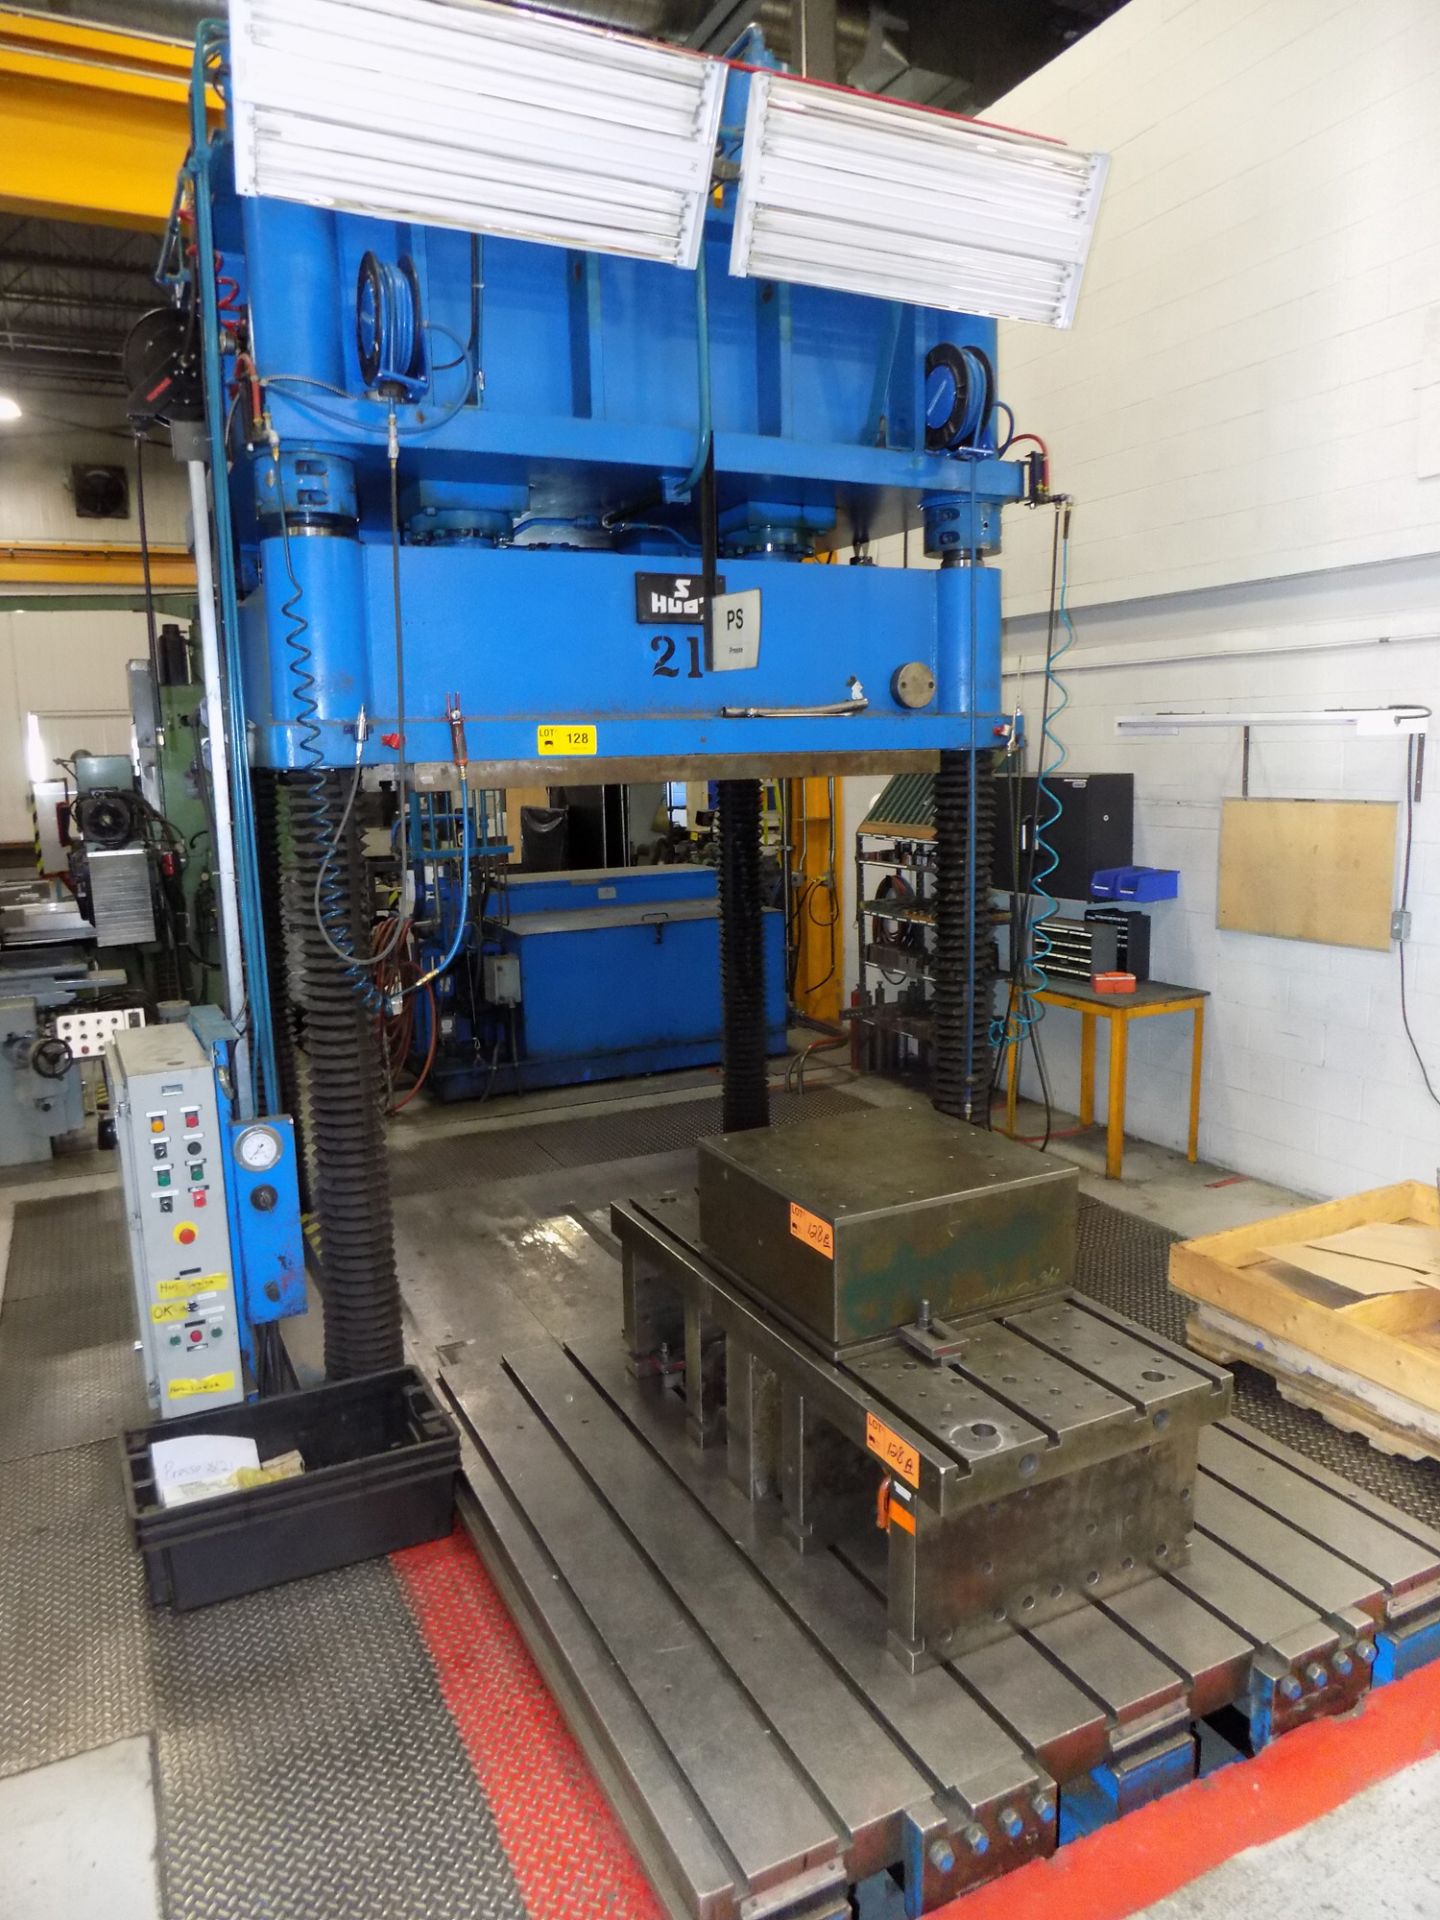 S HUOT 400 TON CAPACITY HYDRAULIC DIE SPOTTING PRESS WITH 78"X80" FRONT TO BACK ROLL IN T-SLOT - Image 3 of 4